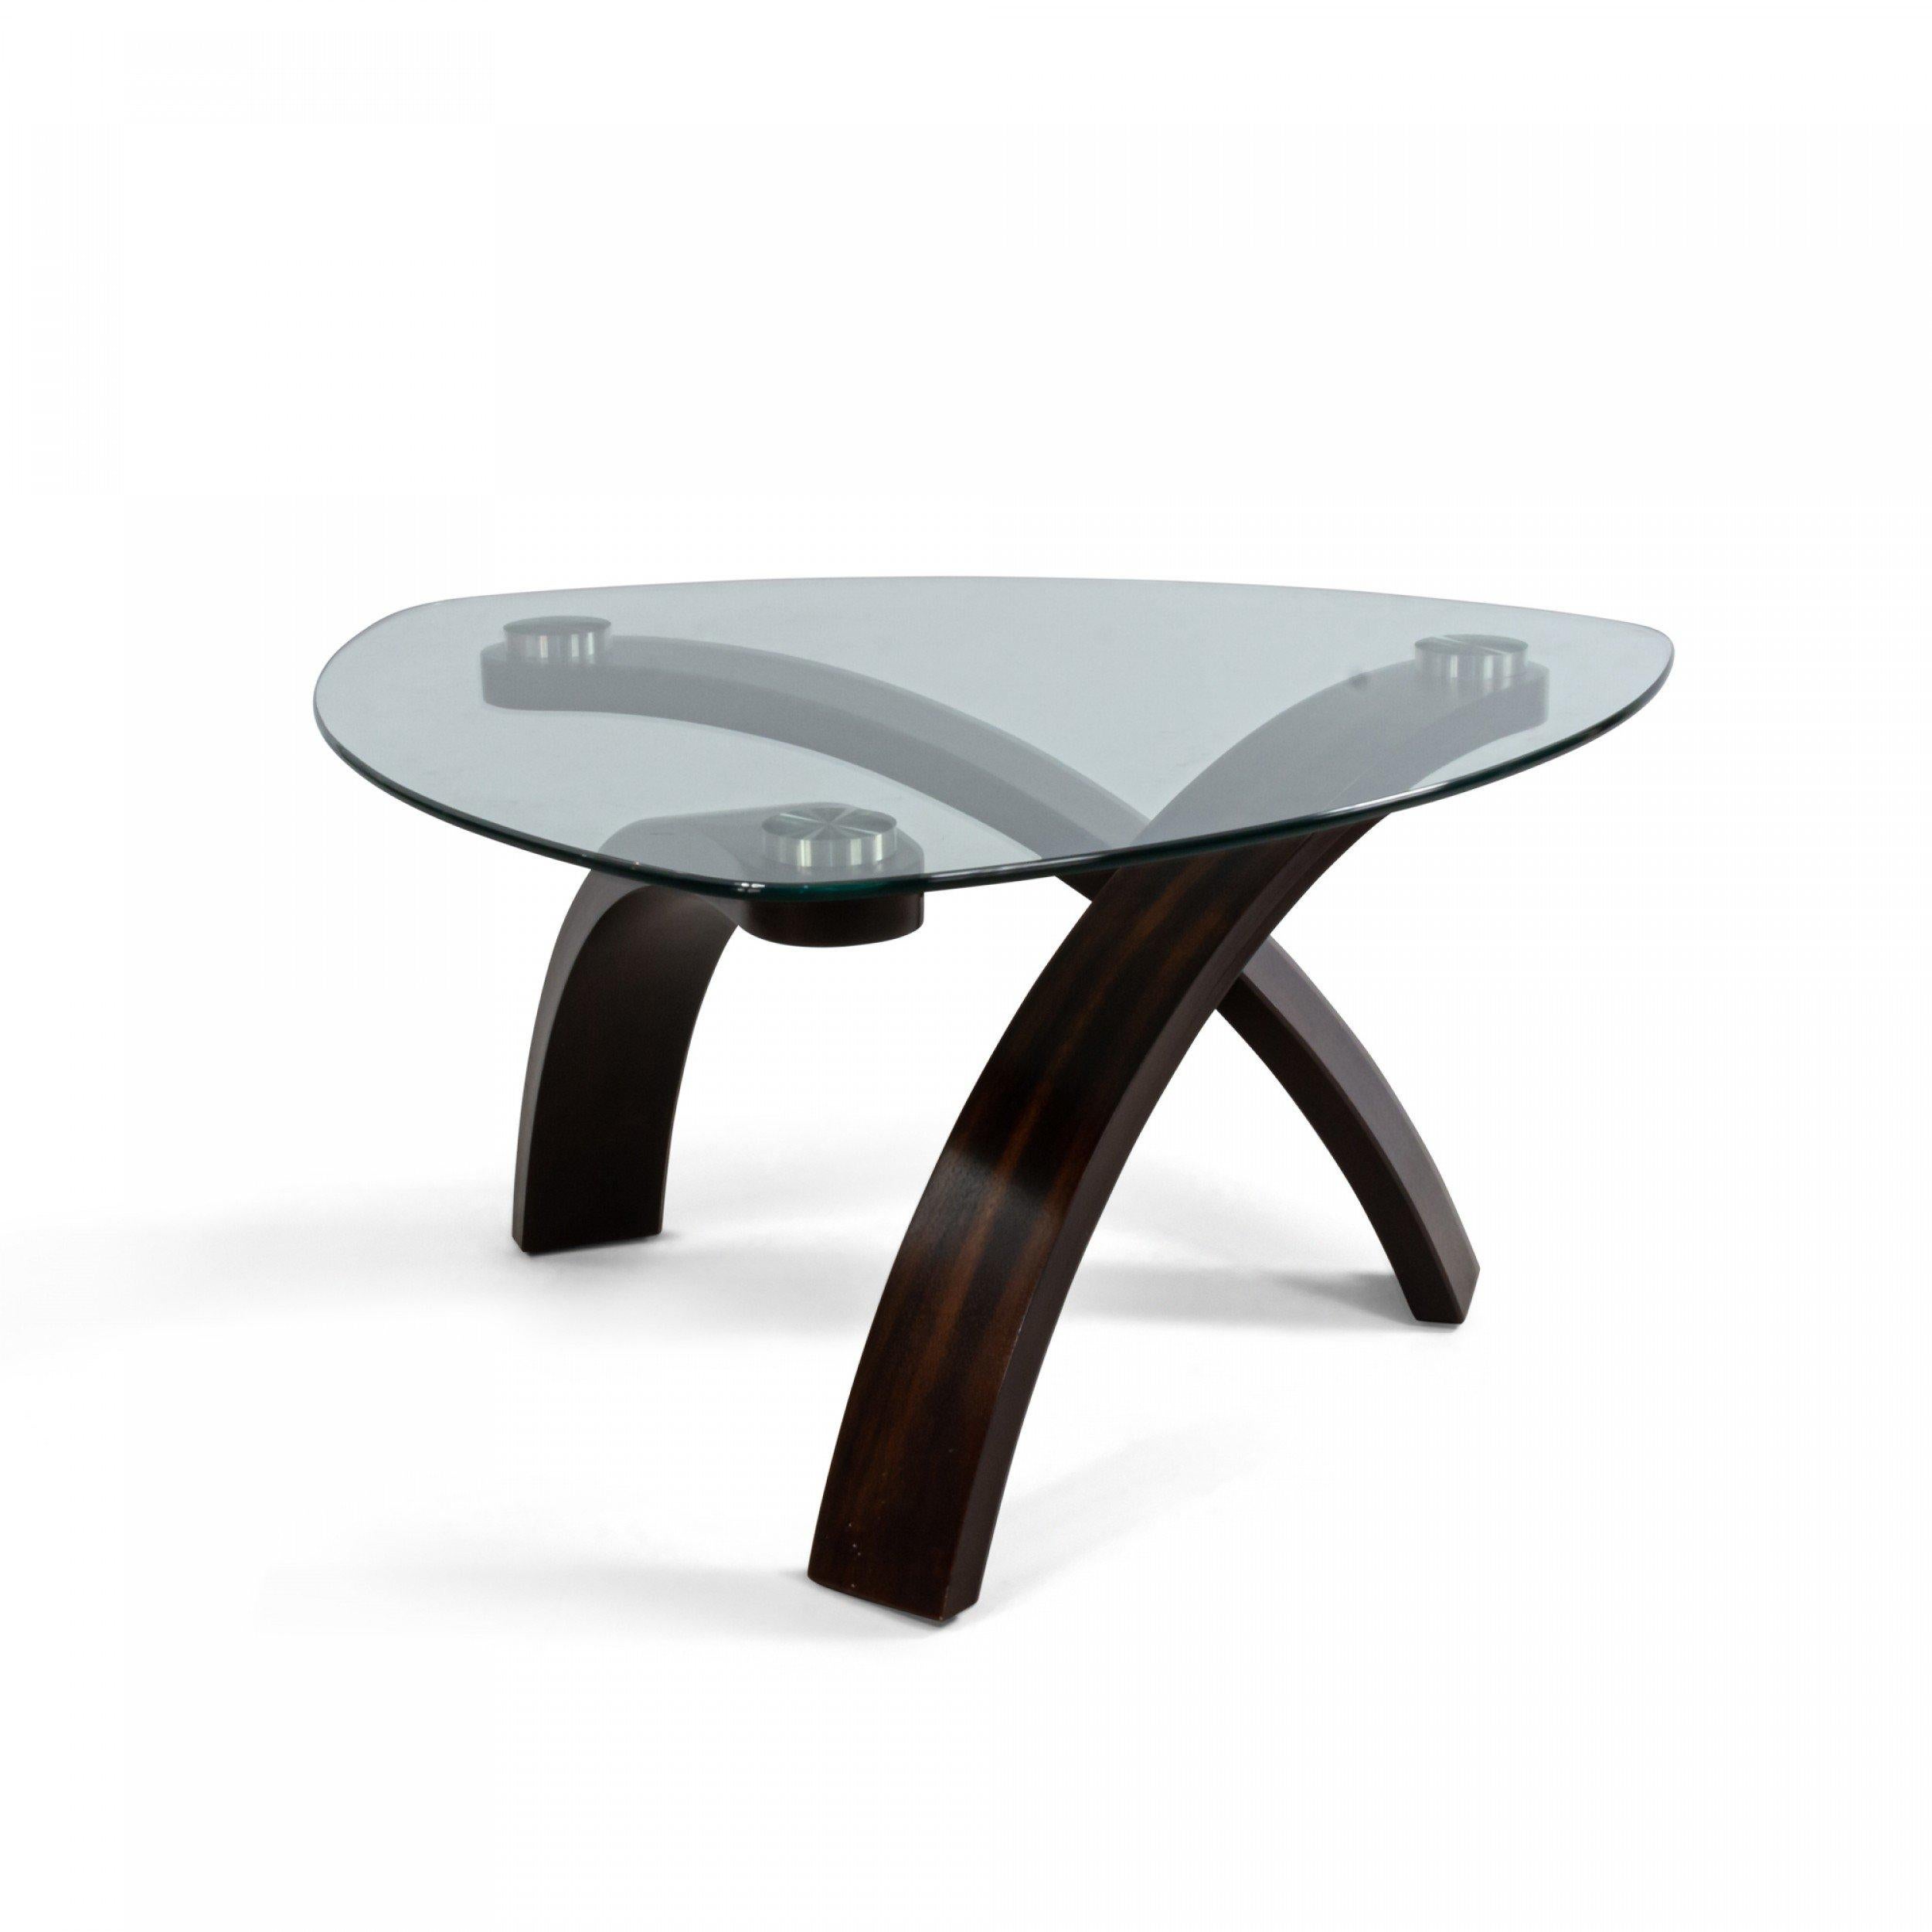 American Modern coffee table with three molded dark wood legs and a three-sided glass top.
 